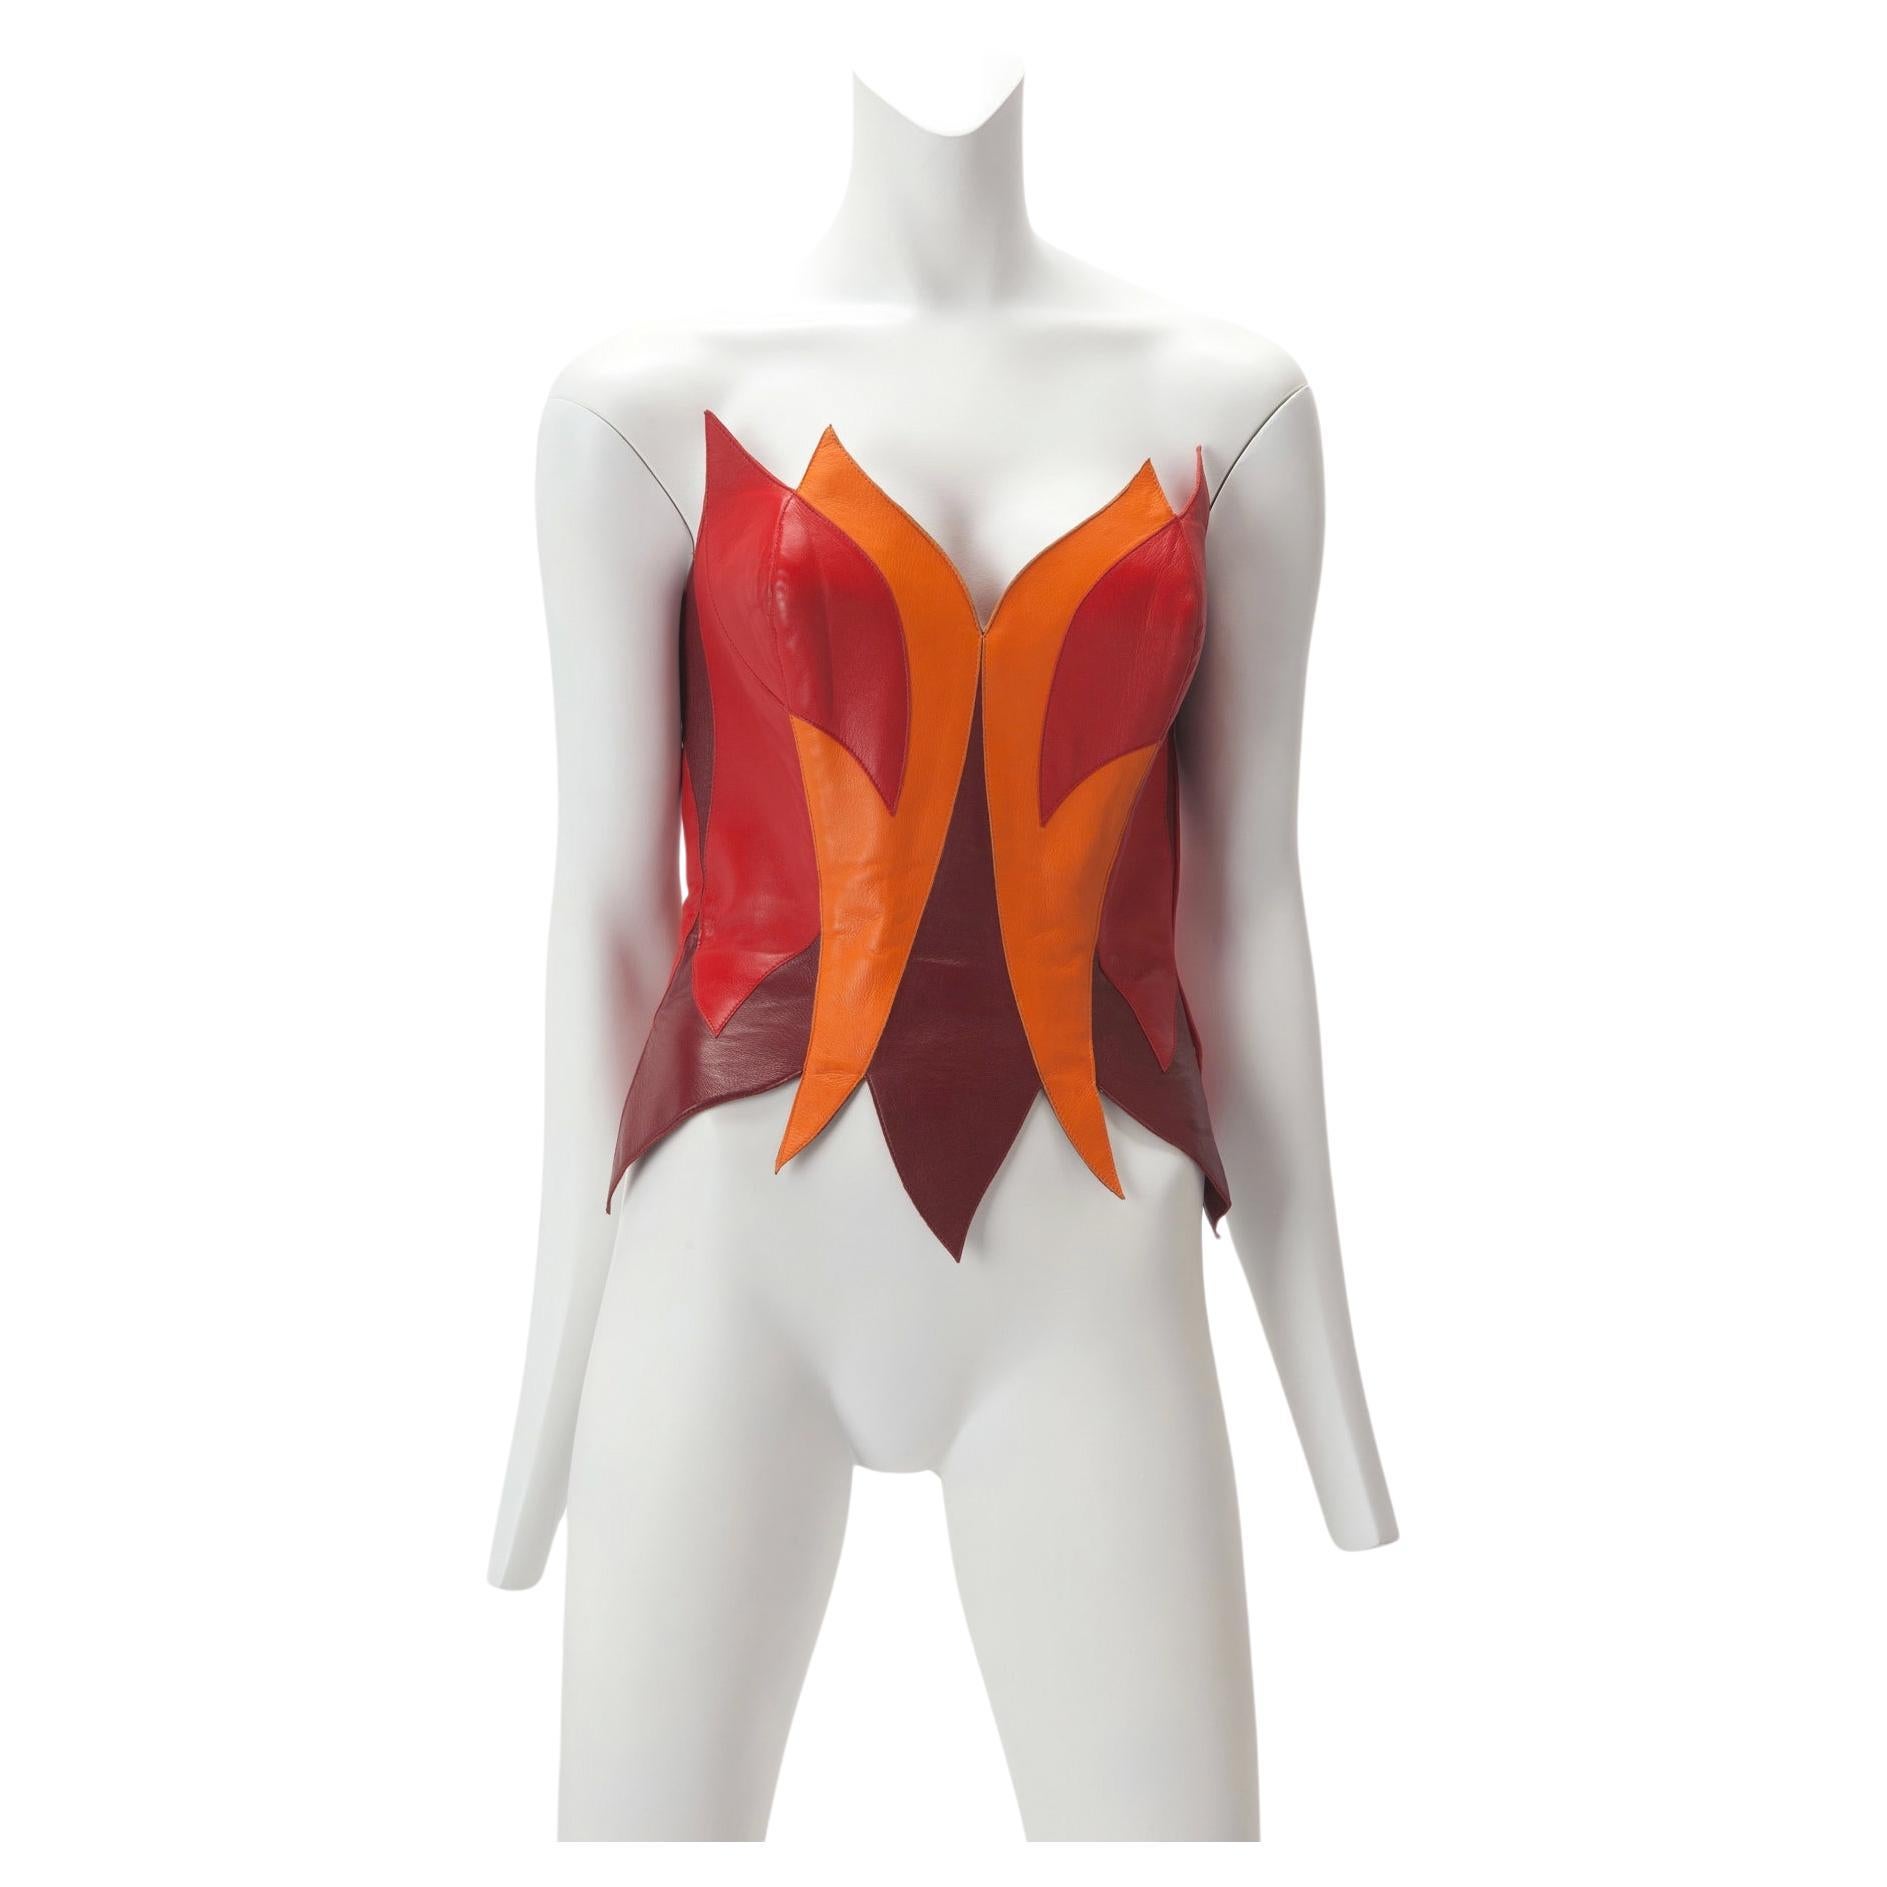 c. 1989-92 Thierry Mugler Couture Leather Flame Bustier Museum